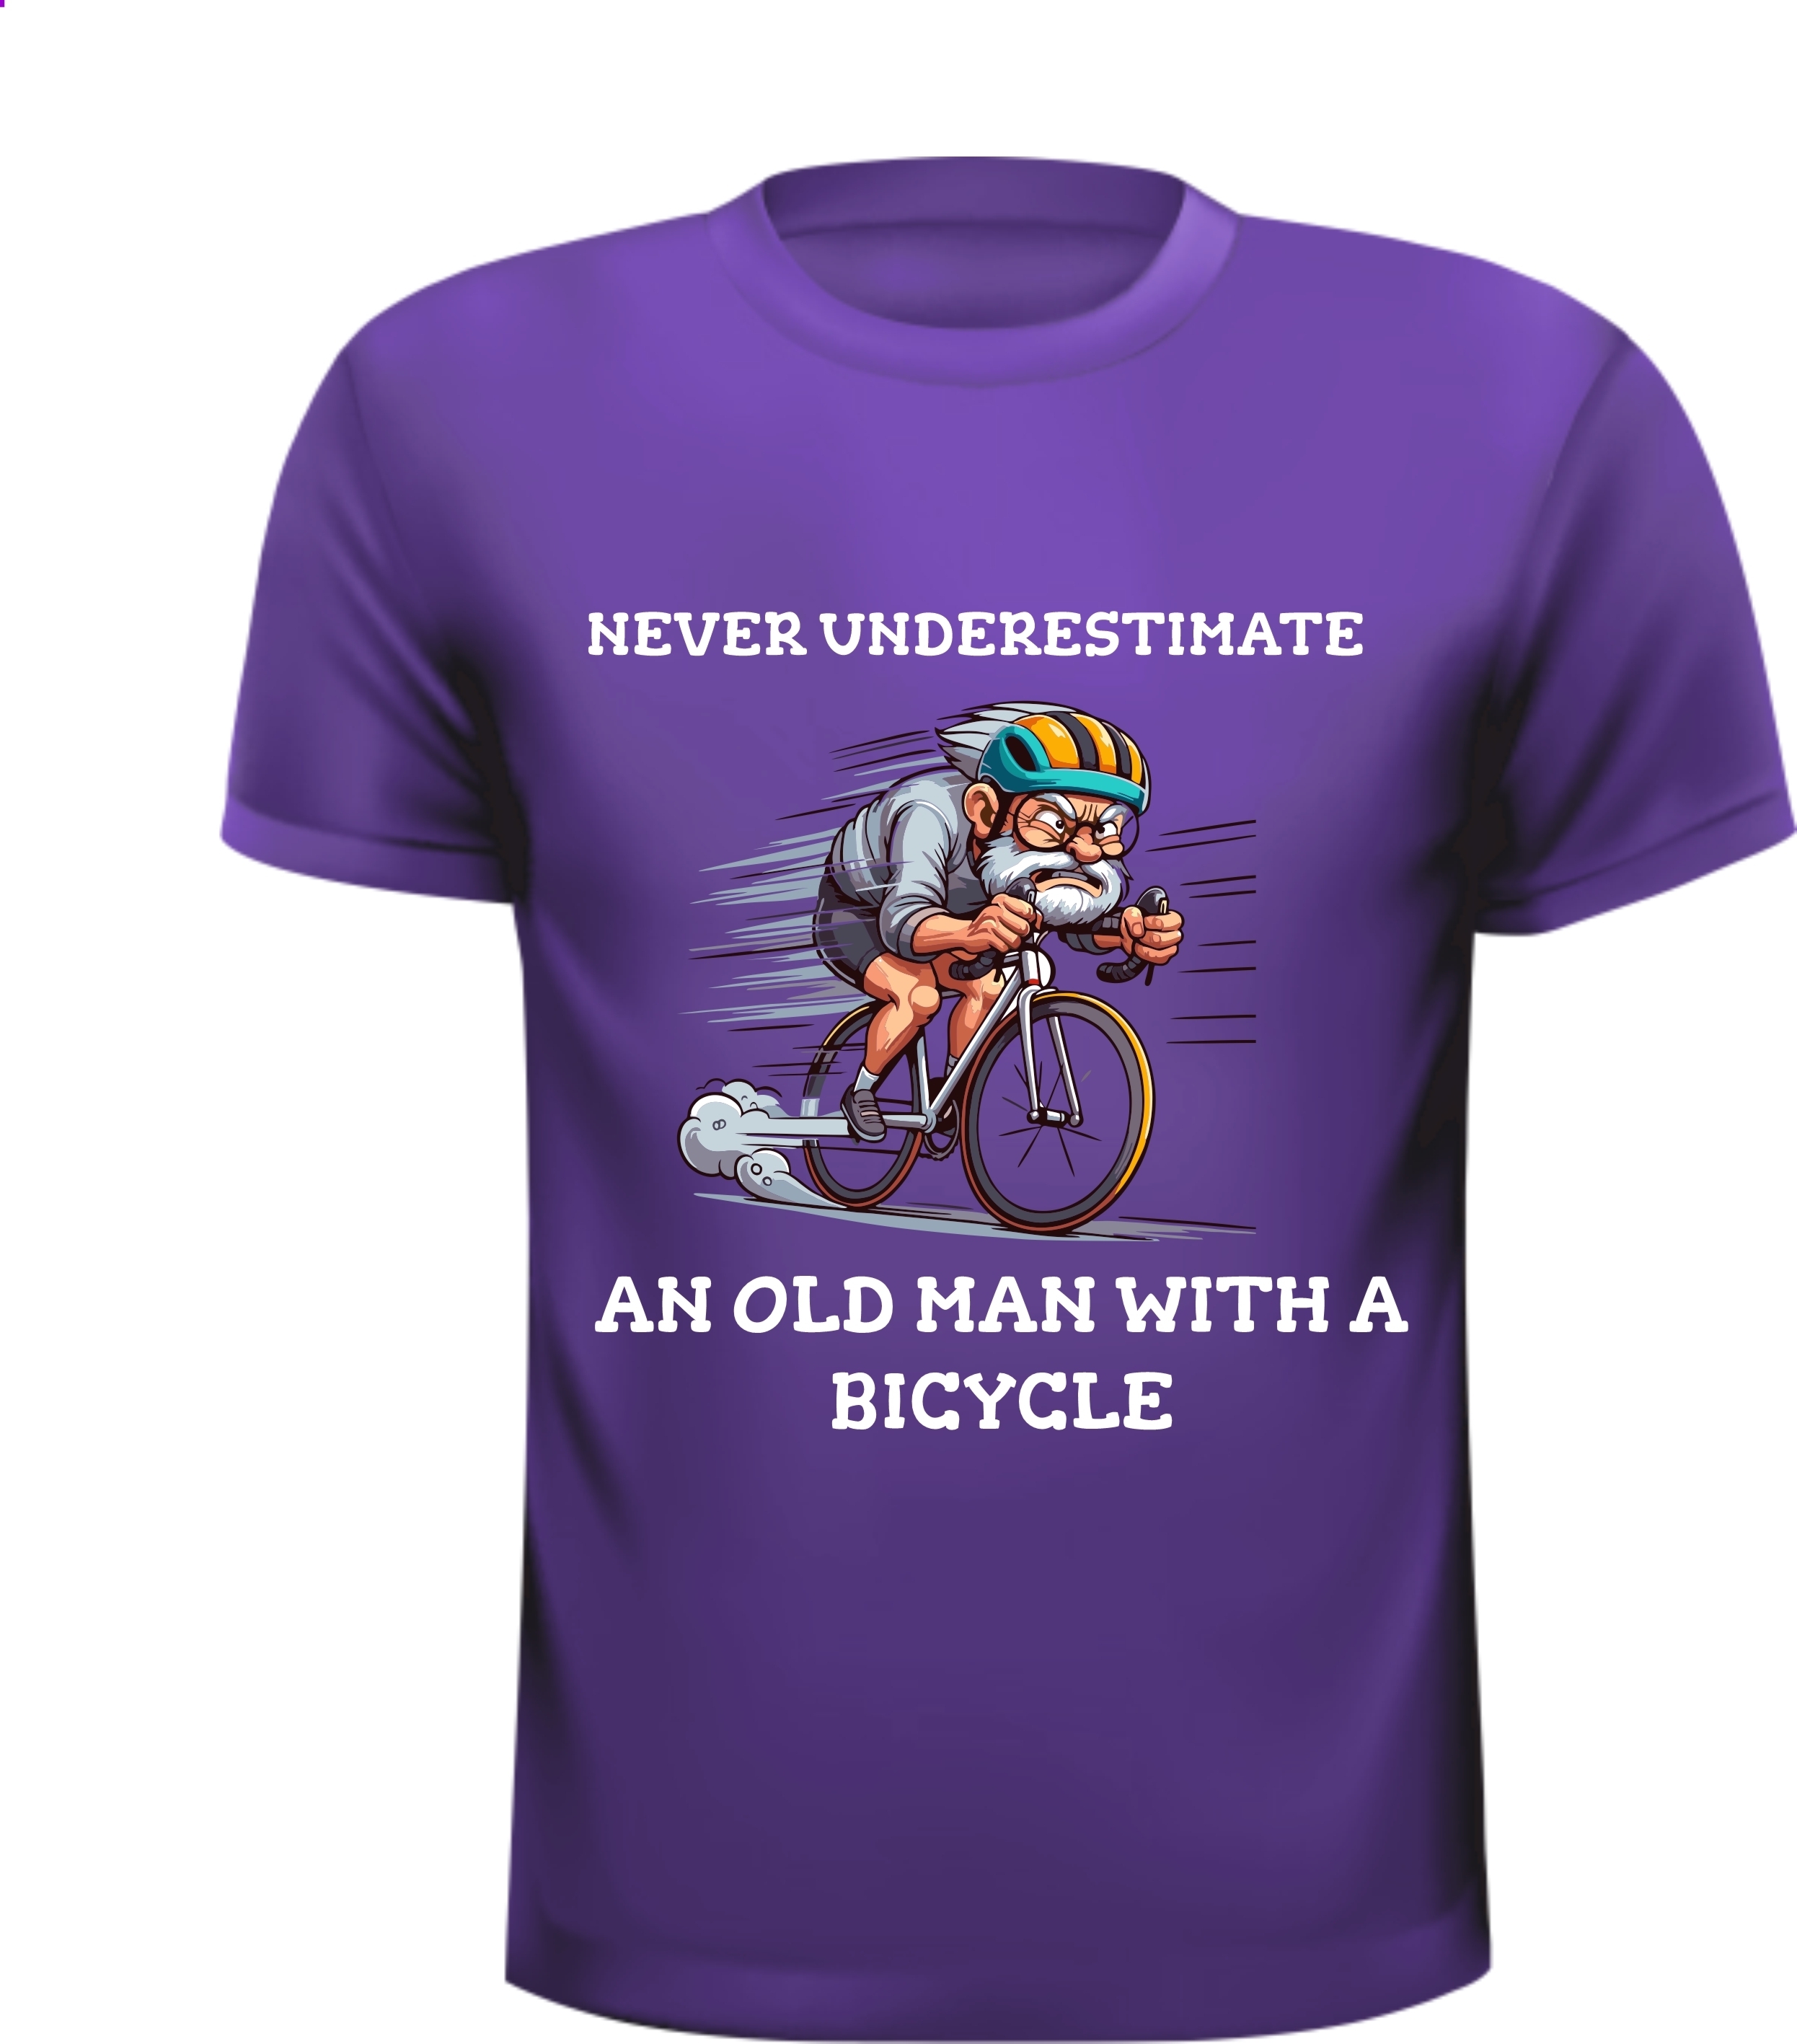 Shirtje never underestimate an old man with a bicycle! kado wielrenner